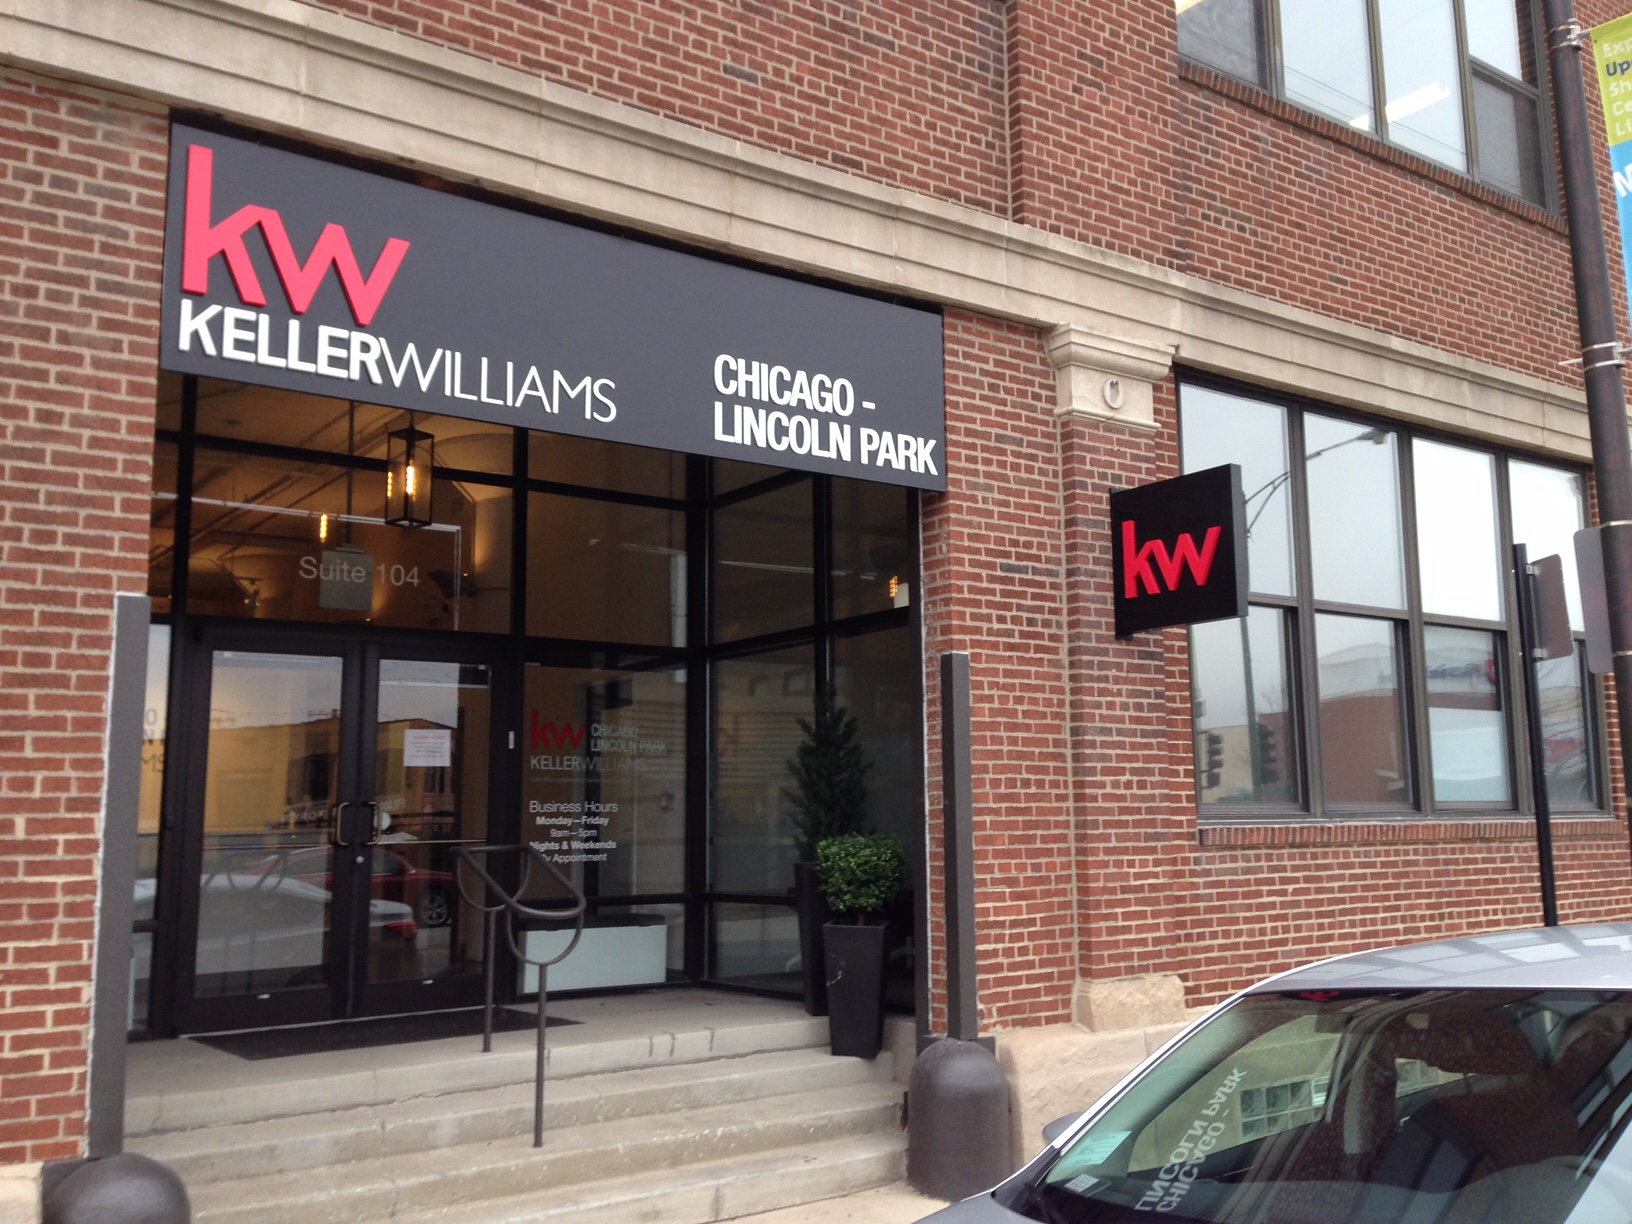 Outdoor sign promoting Keller Williams business